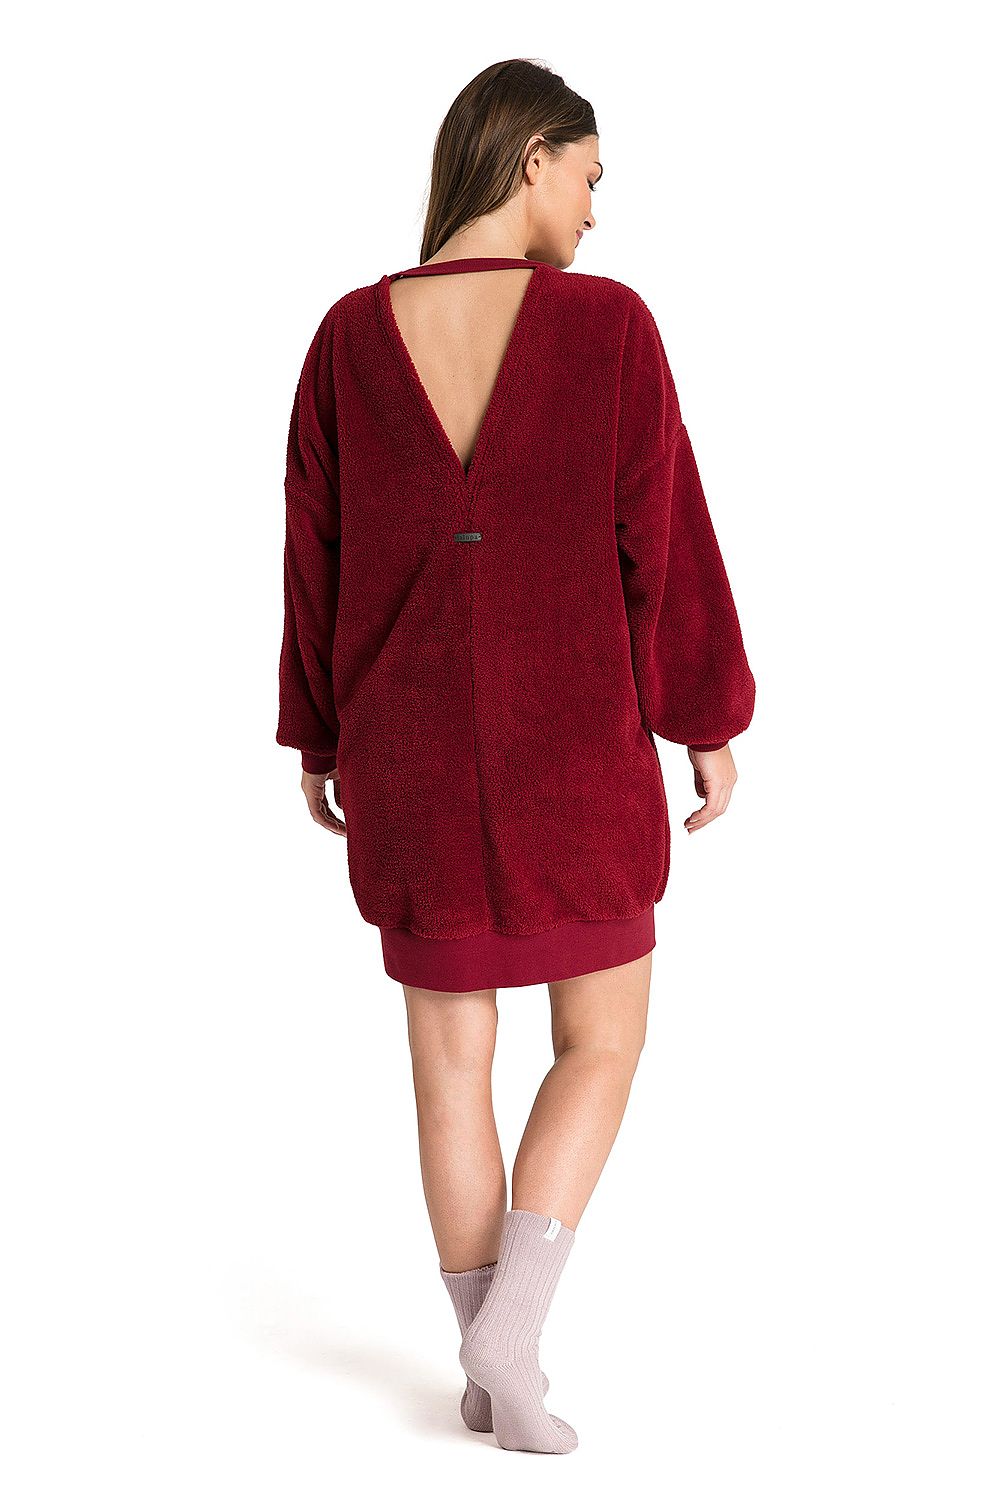 LaLupa Relaxed Fit Tunic Dress Burgundy